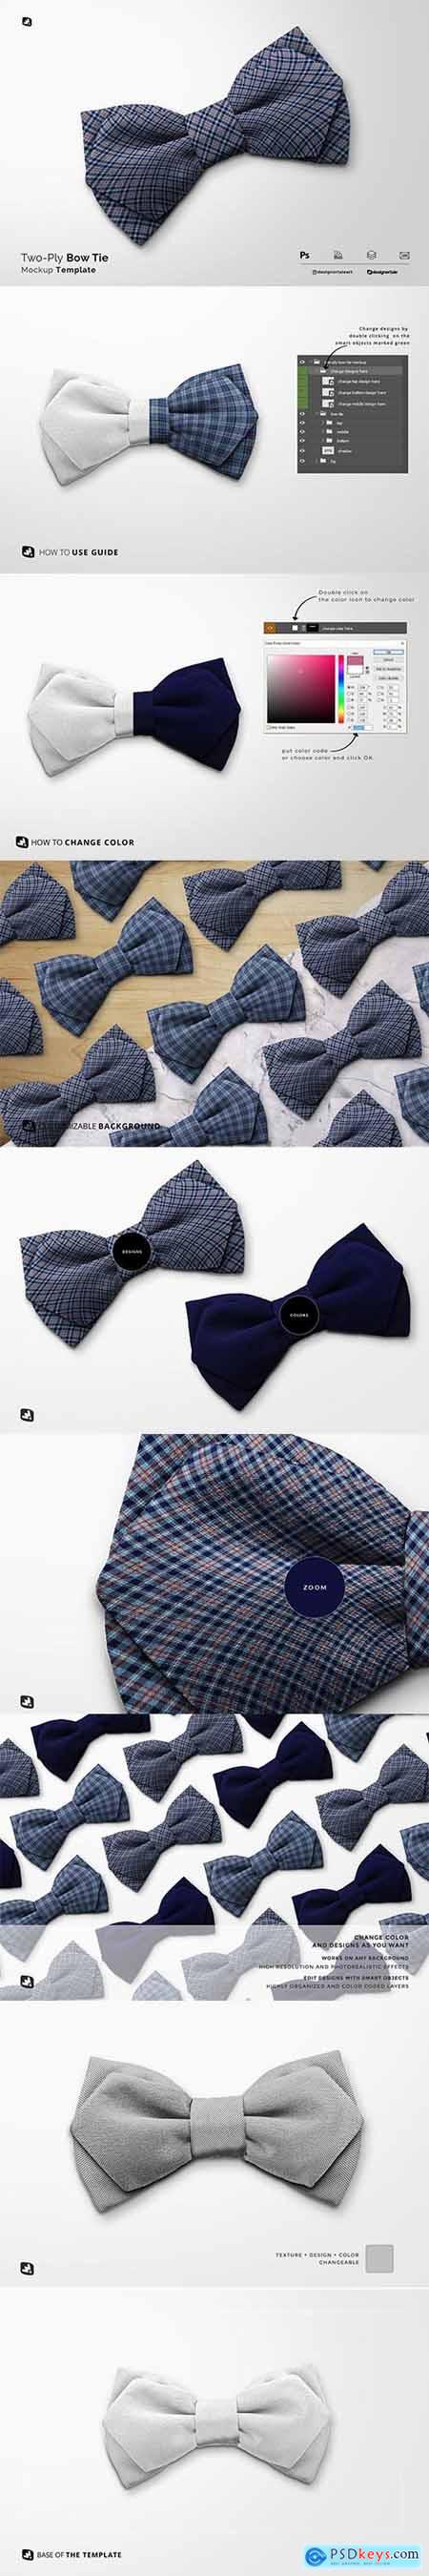 Two-Ply Bow Tie Mockup 6245229